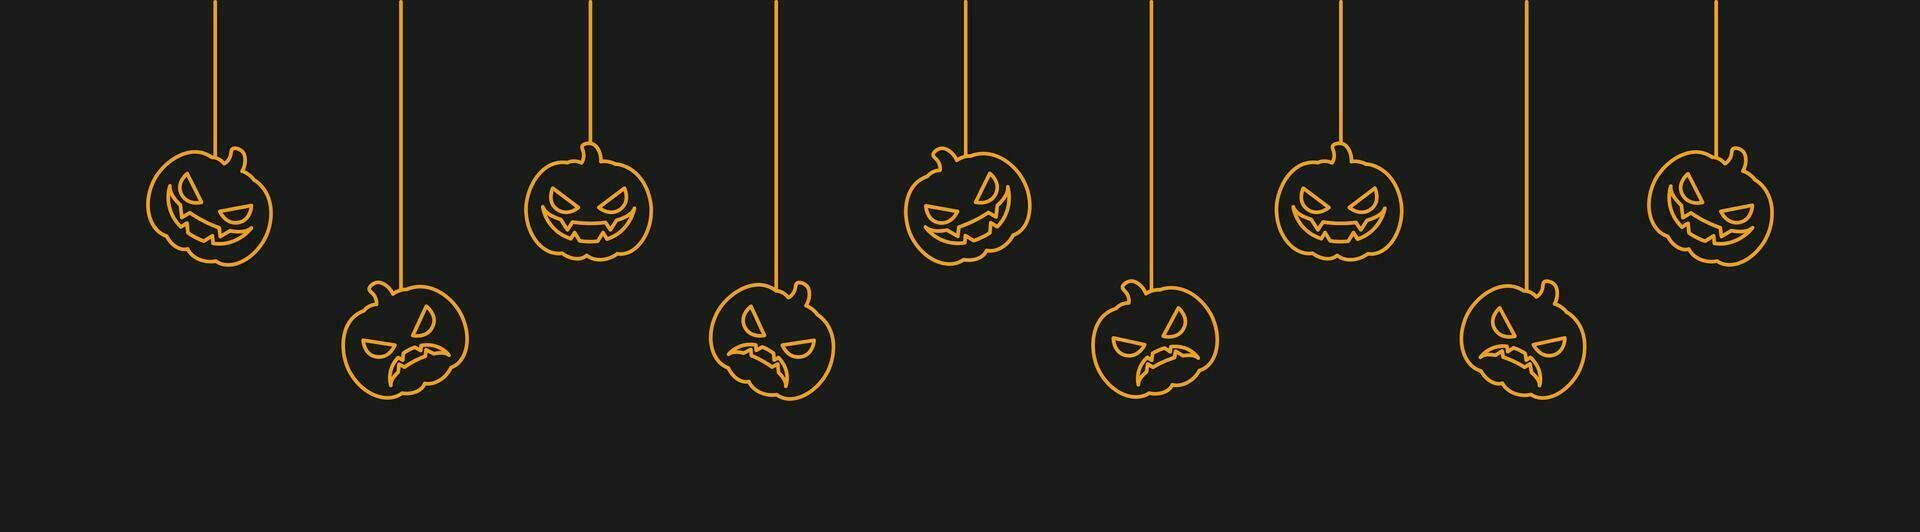 Happy Halloween banner or border with glowing jack o lantern pumpkins. Hanging Spooky Ornaments Decoration Vector illustration, trick or treat party invitation